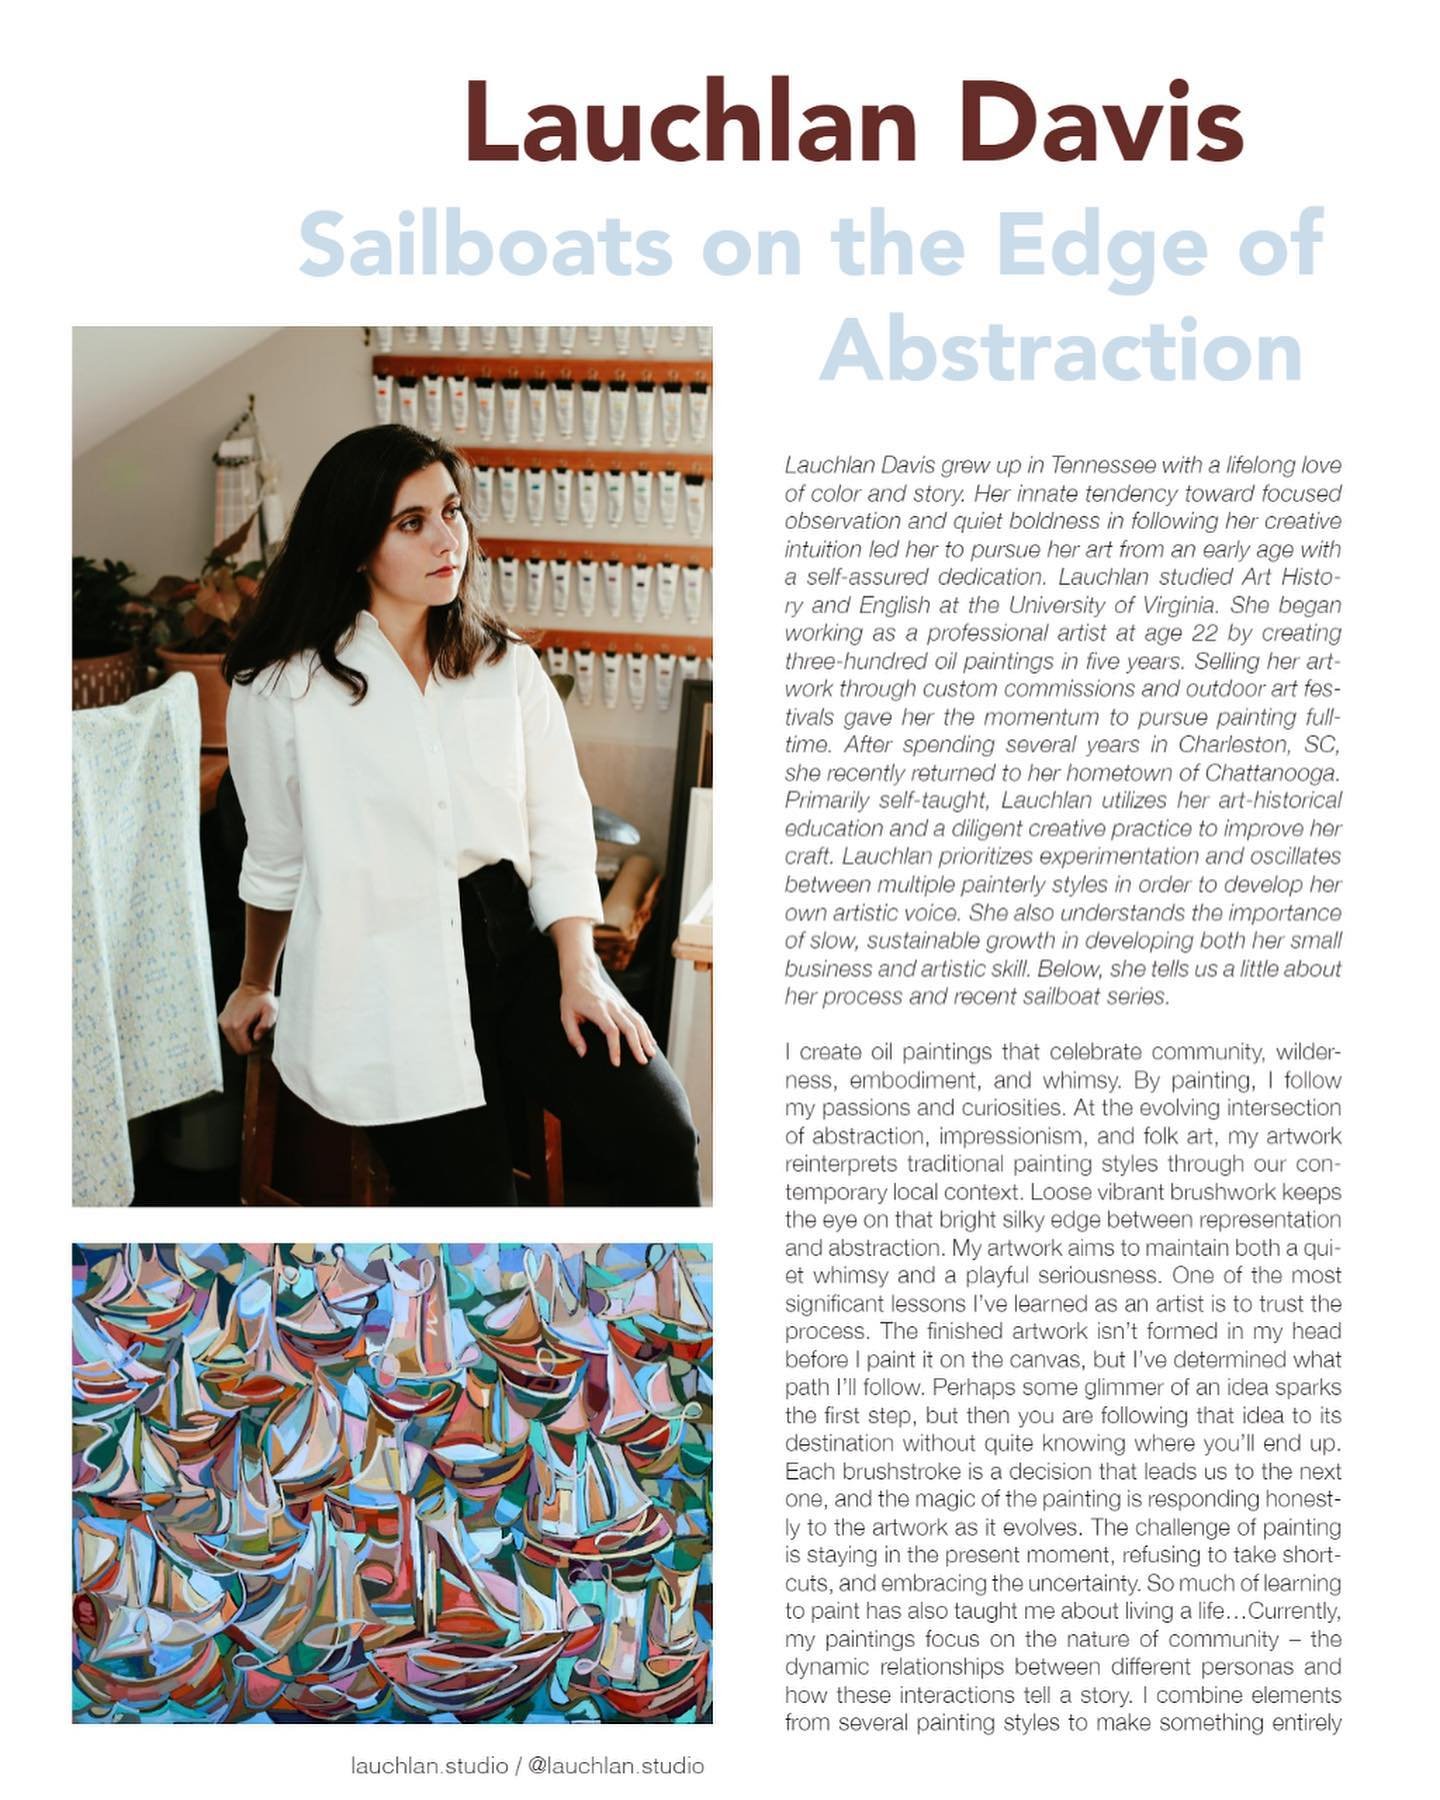 Sailing into the Charleston art scene this spring&hellip;
Thank you, @nue_charleston_magazine !
&mdash; mark your calendars, I&rsquo;ll be exhibiting in Charleston from May 24 to June 8 with @piccolo_spoleto @piccolospoletooutdoorart